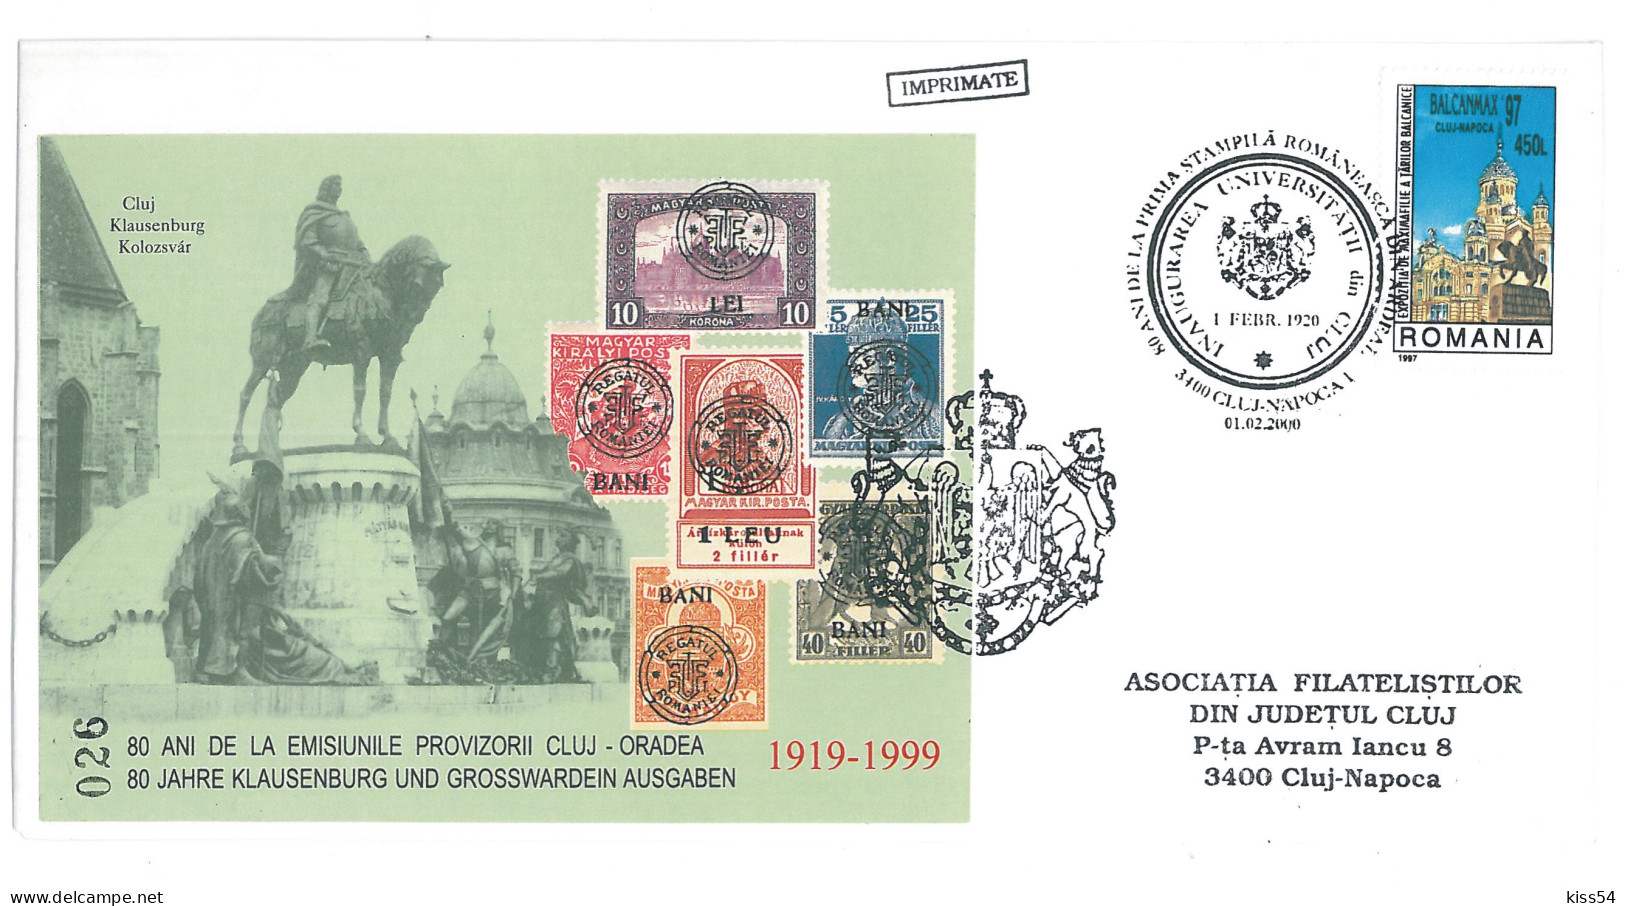 COV 91 - 3034 80 Years Since The First Romanian Cancellation From Transylvania,  Romania - Cover - Used - 2000 - Paketmarken